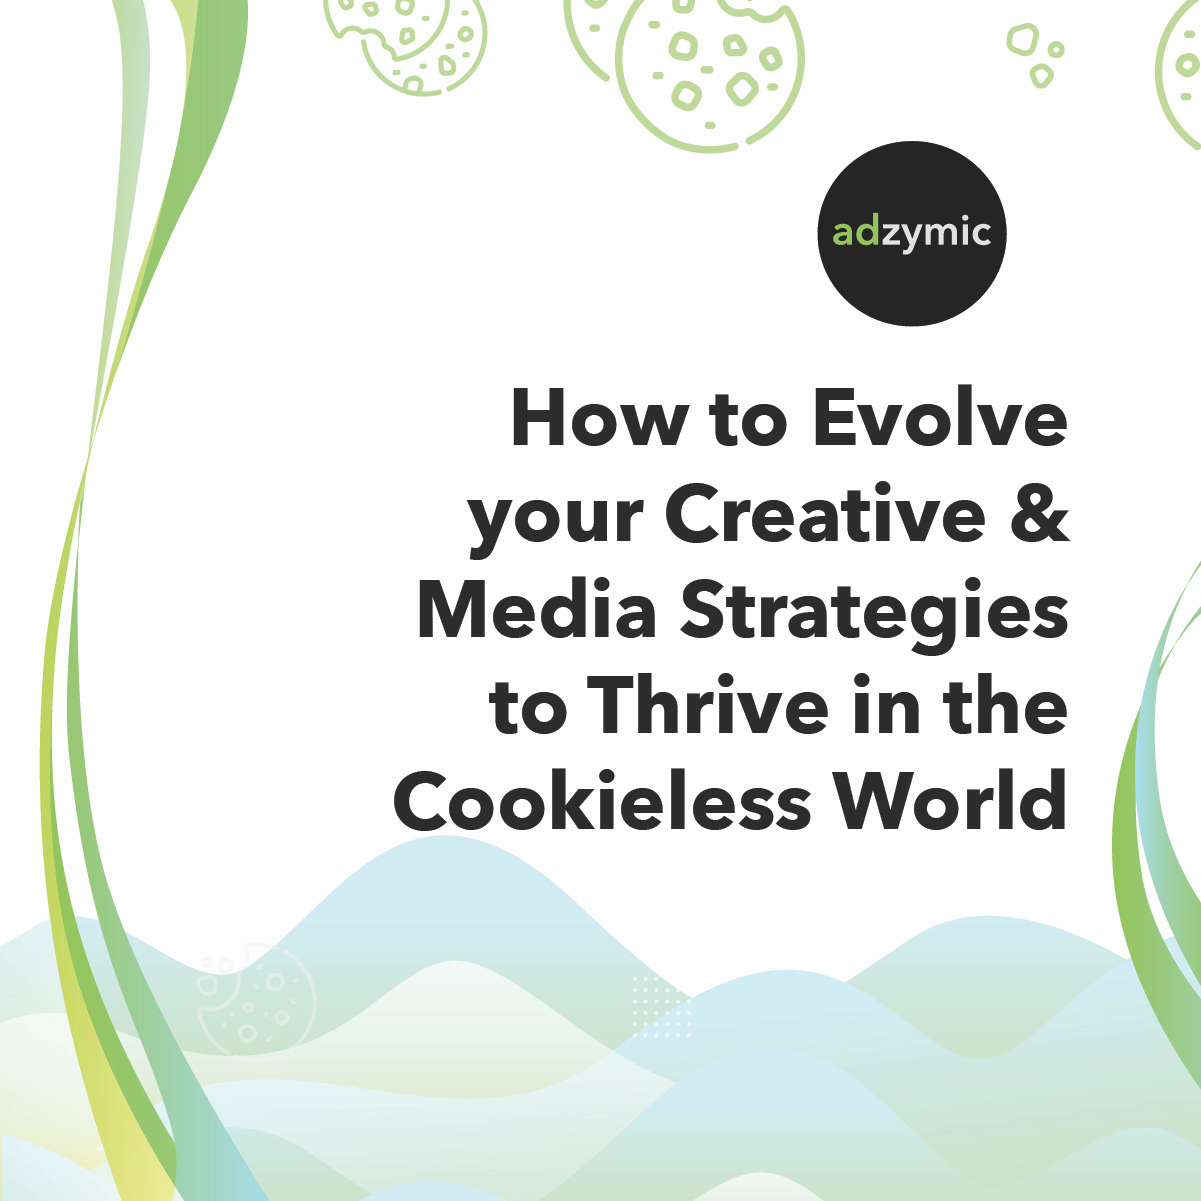 How to Evolve your Creatives and Media Strategies to Thrive in the Cookieless World